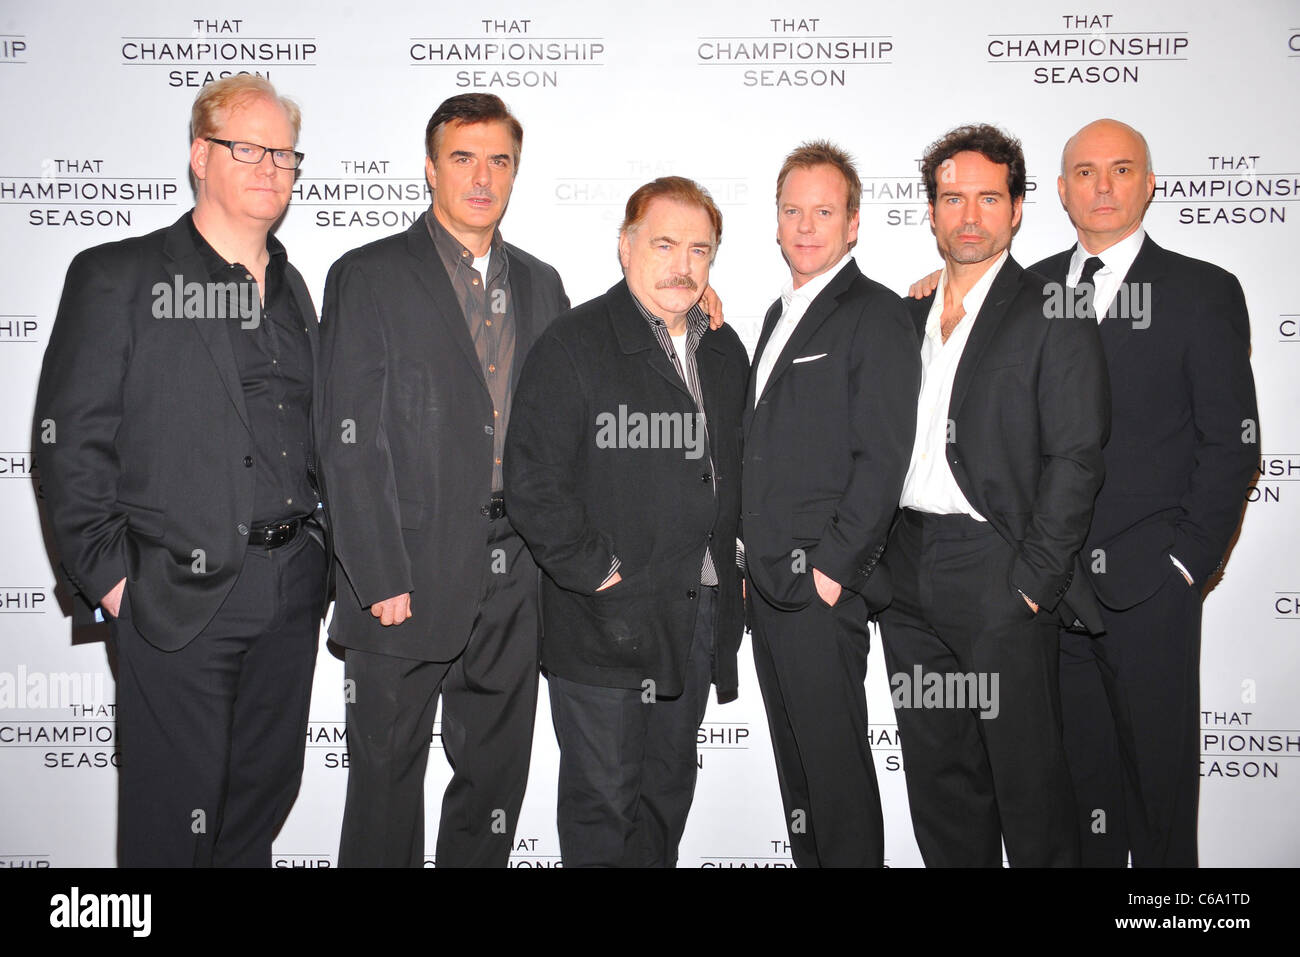 Jim Gaffigan, Brian Cox, Chris Noth, Kiefer Sutherland, Jason Patric, Gregory Mosher in attendance for THAT CHAMPIONSHIP SEASON Stock Photo